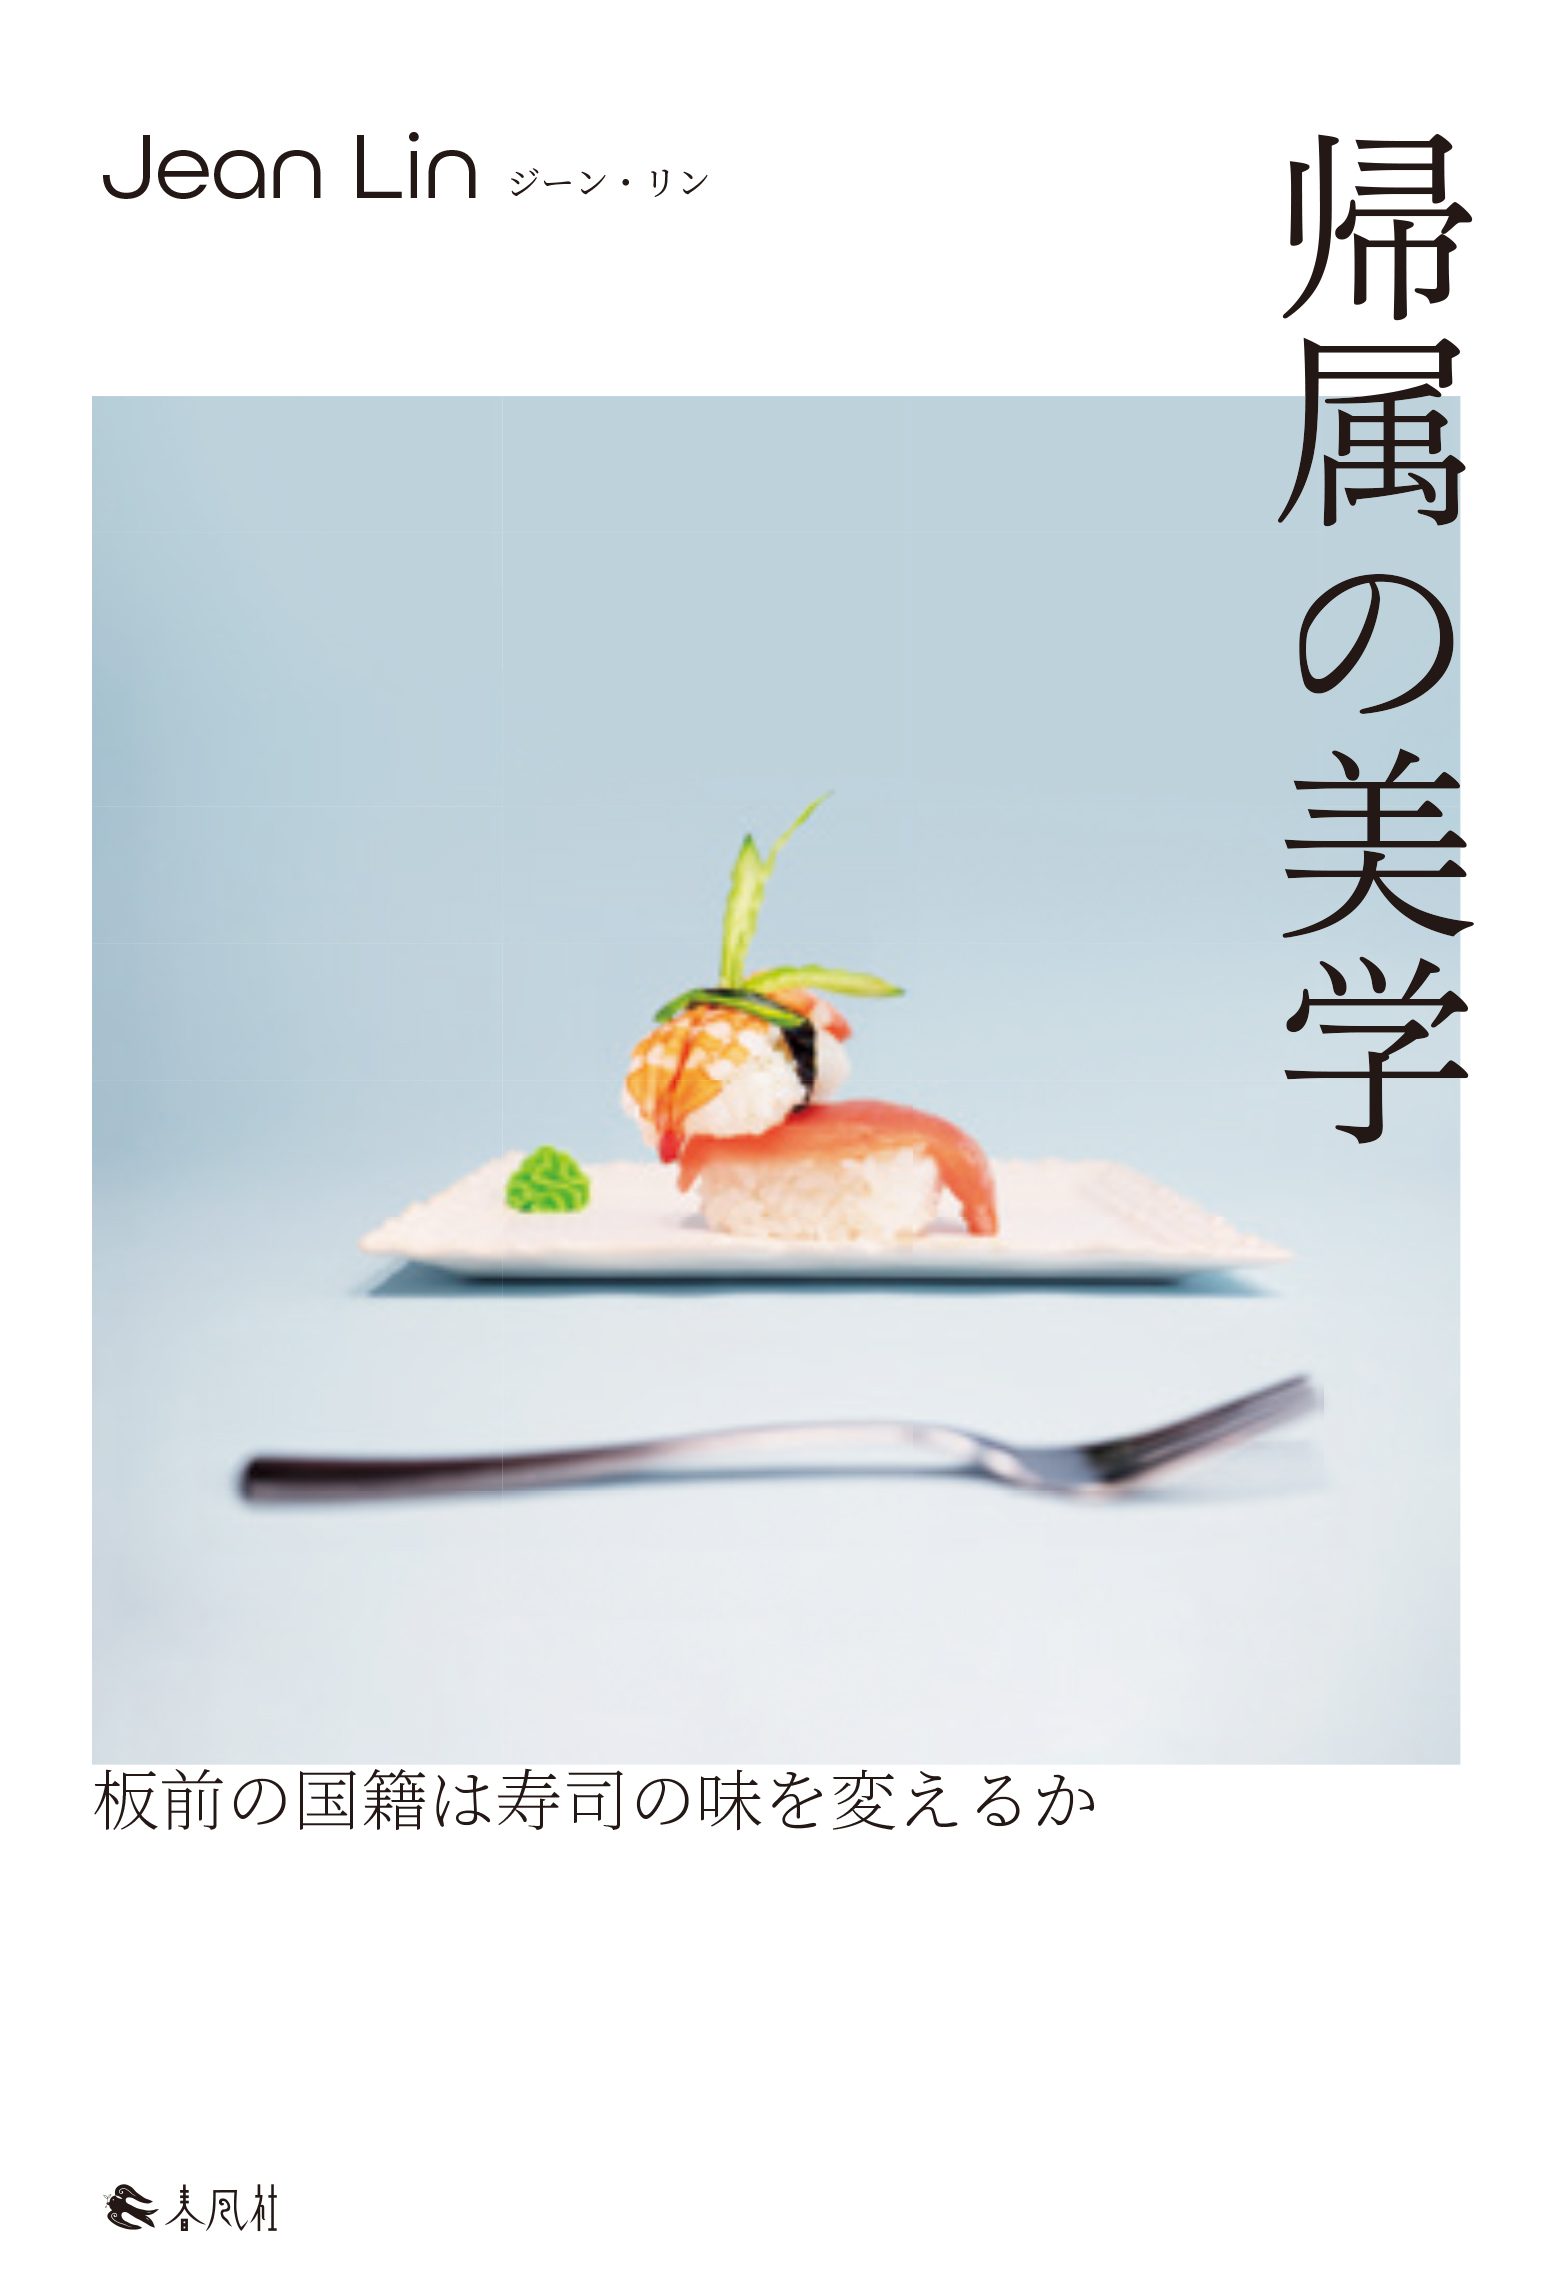 A white cover with an illustration of a sushi